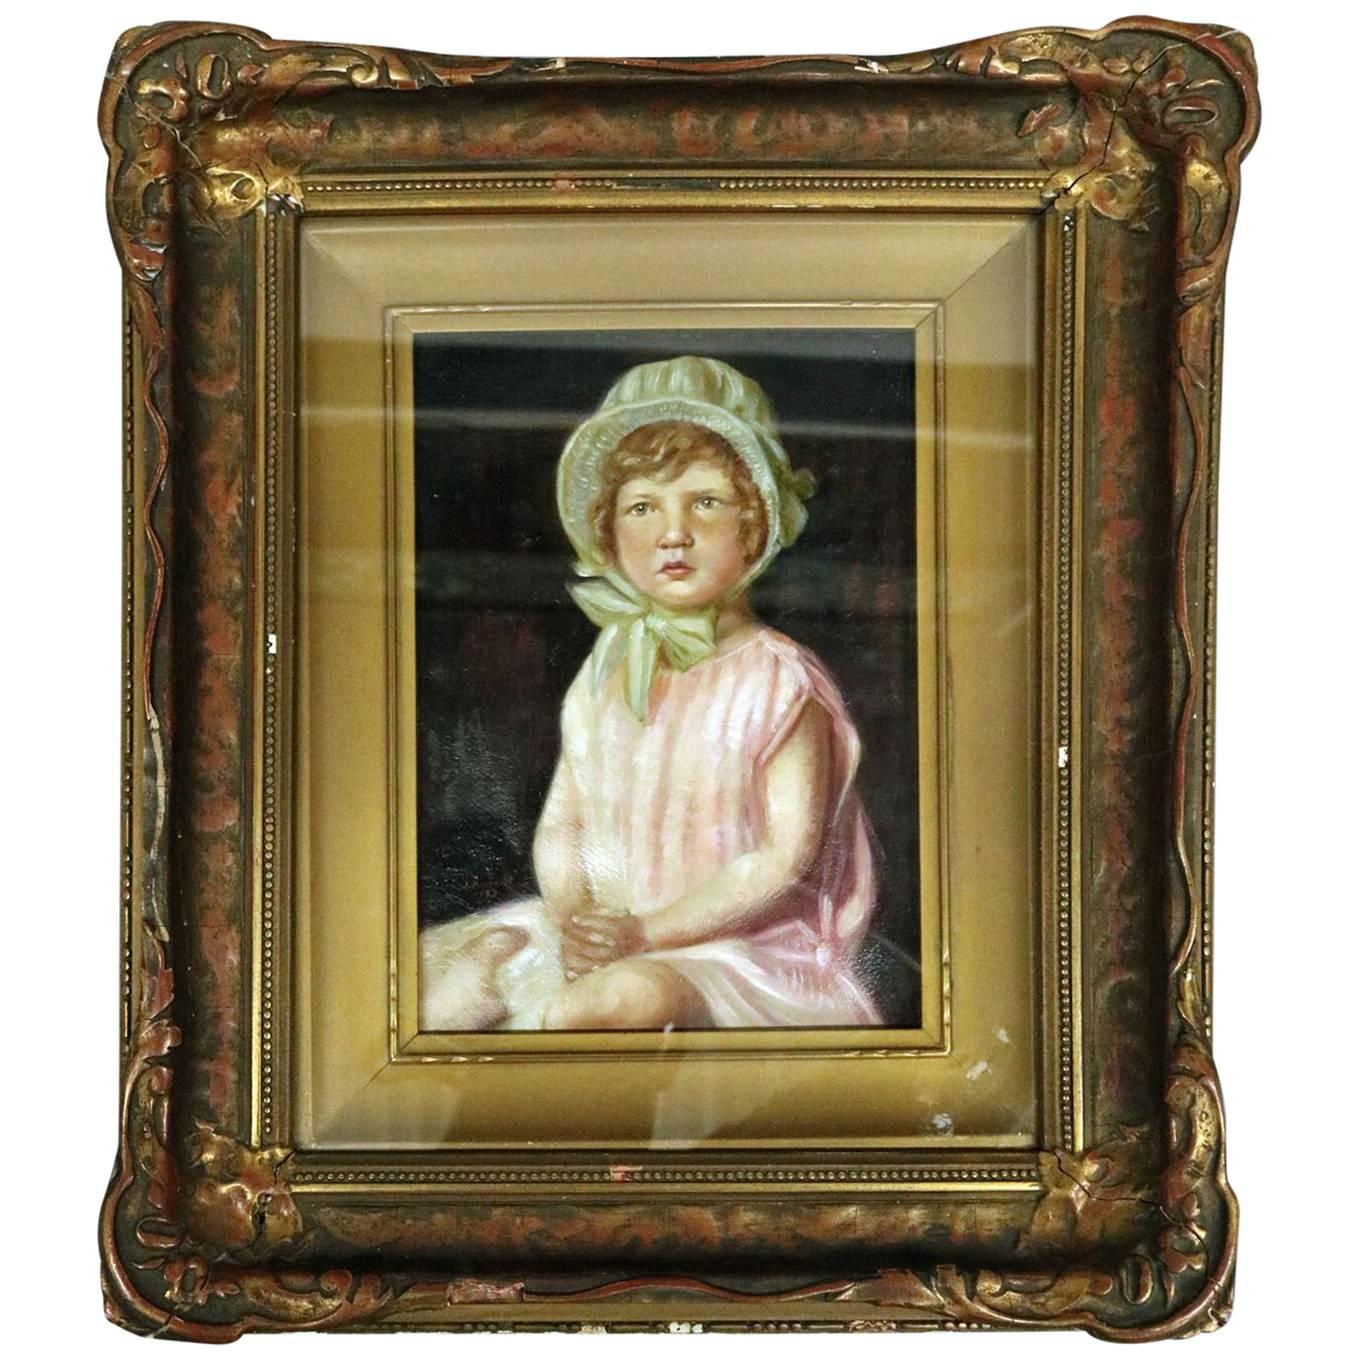 Antique Oil on Canvas of Young Girl by Joseph Hilpert, Signed and Dated, 1929